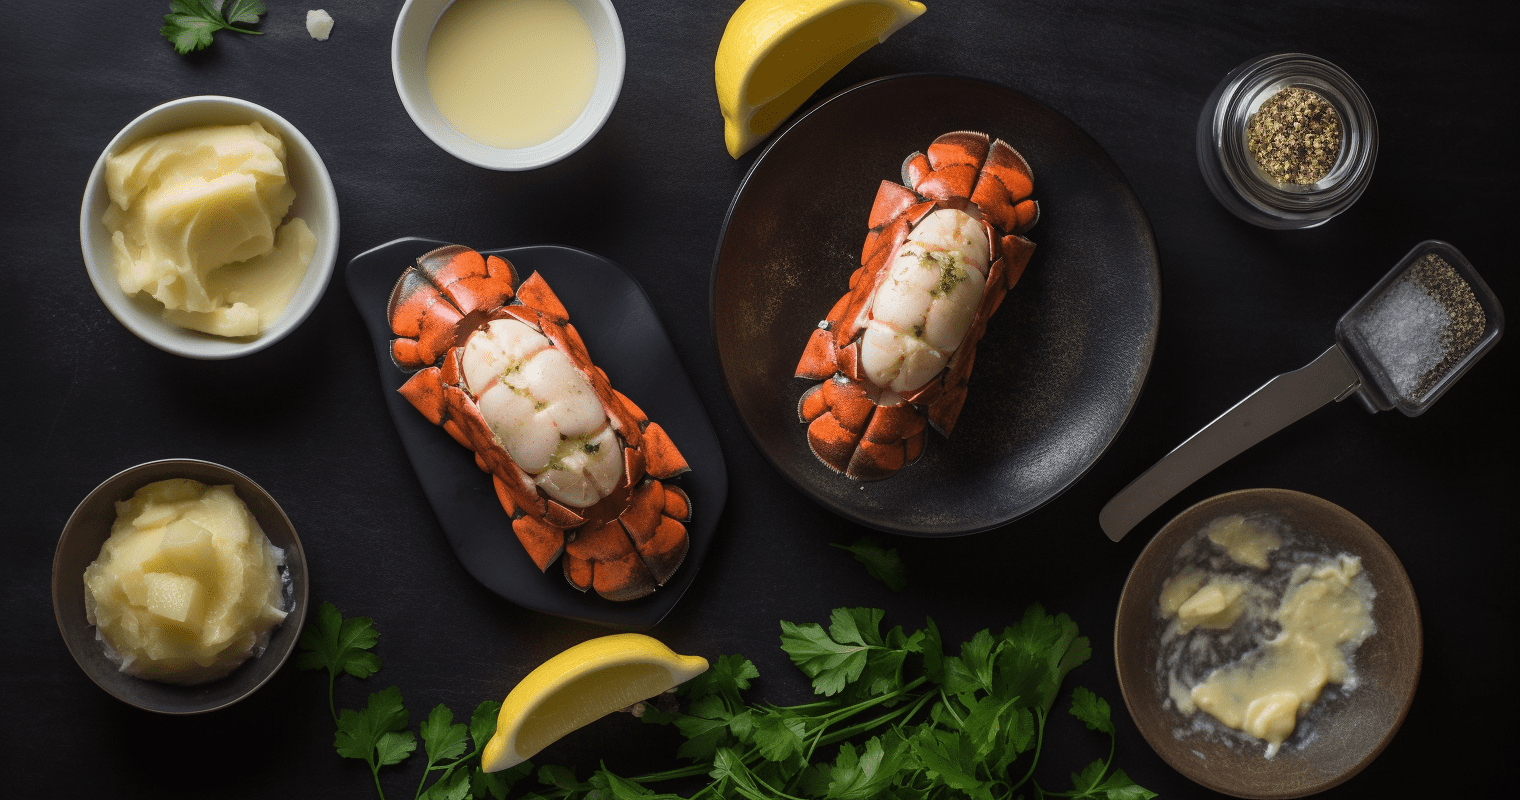 Lobster Tails with Garlic Butter Ingredients